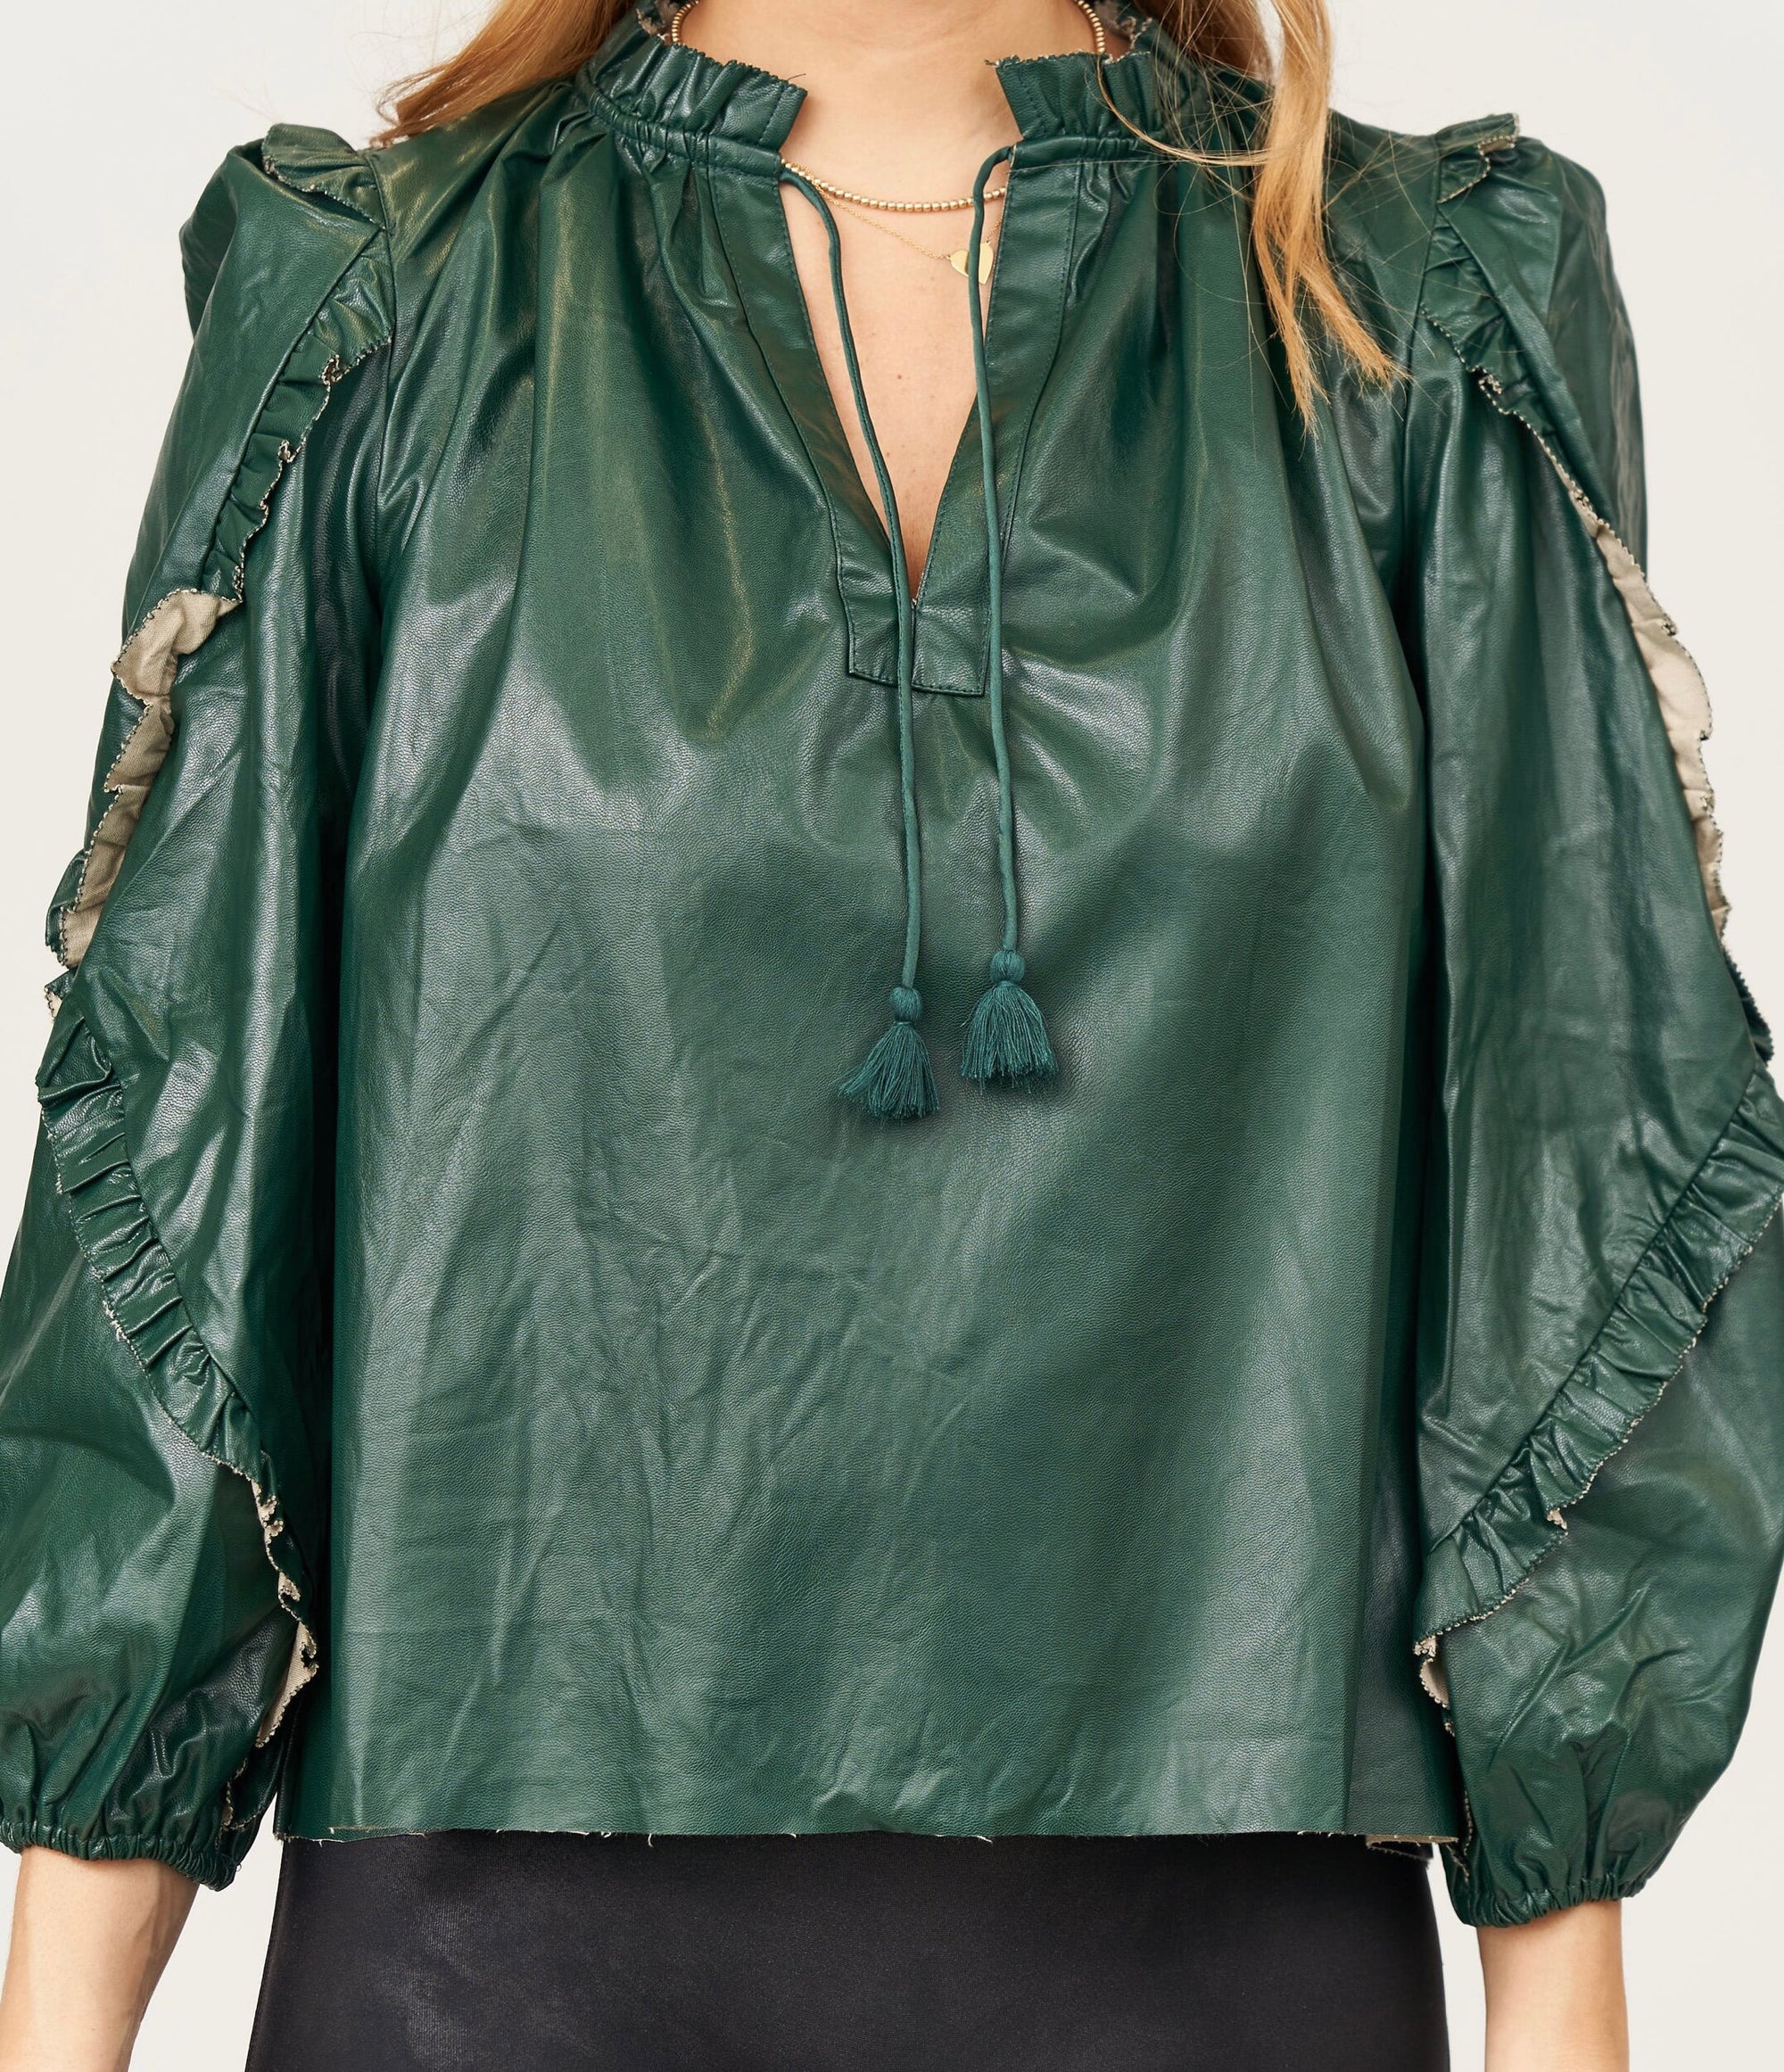 Emerald Leather Top